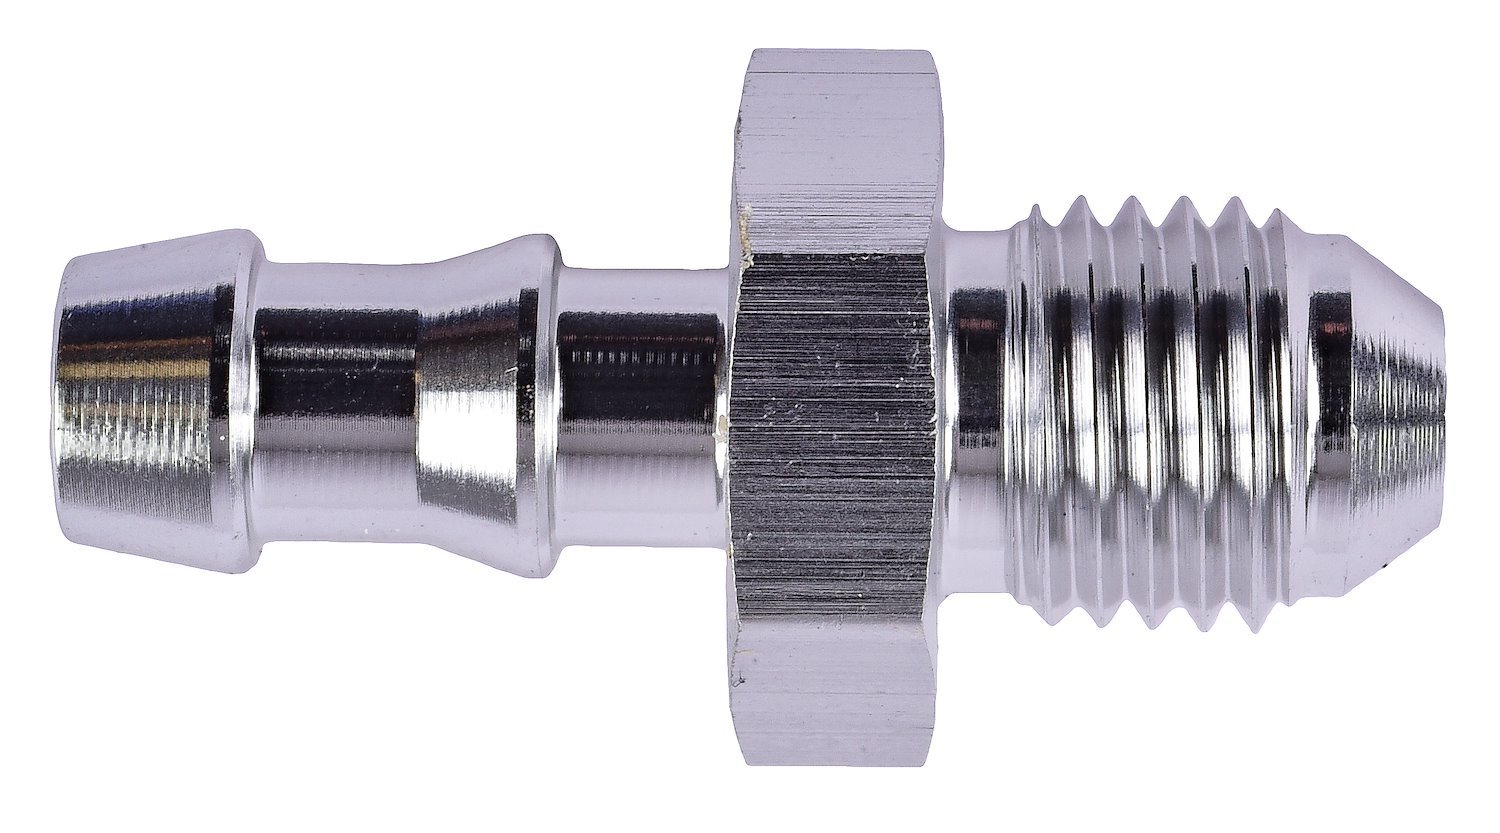 AN to Hose Barb Straight Adapter Fitting [-4